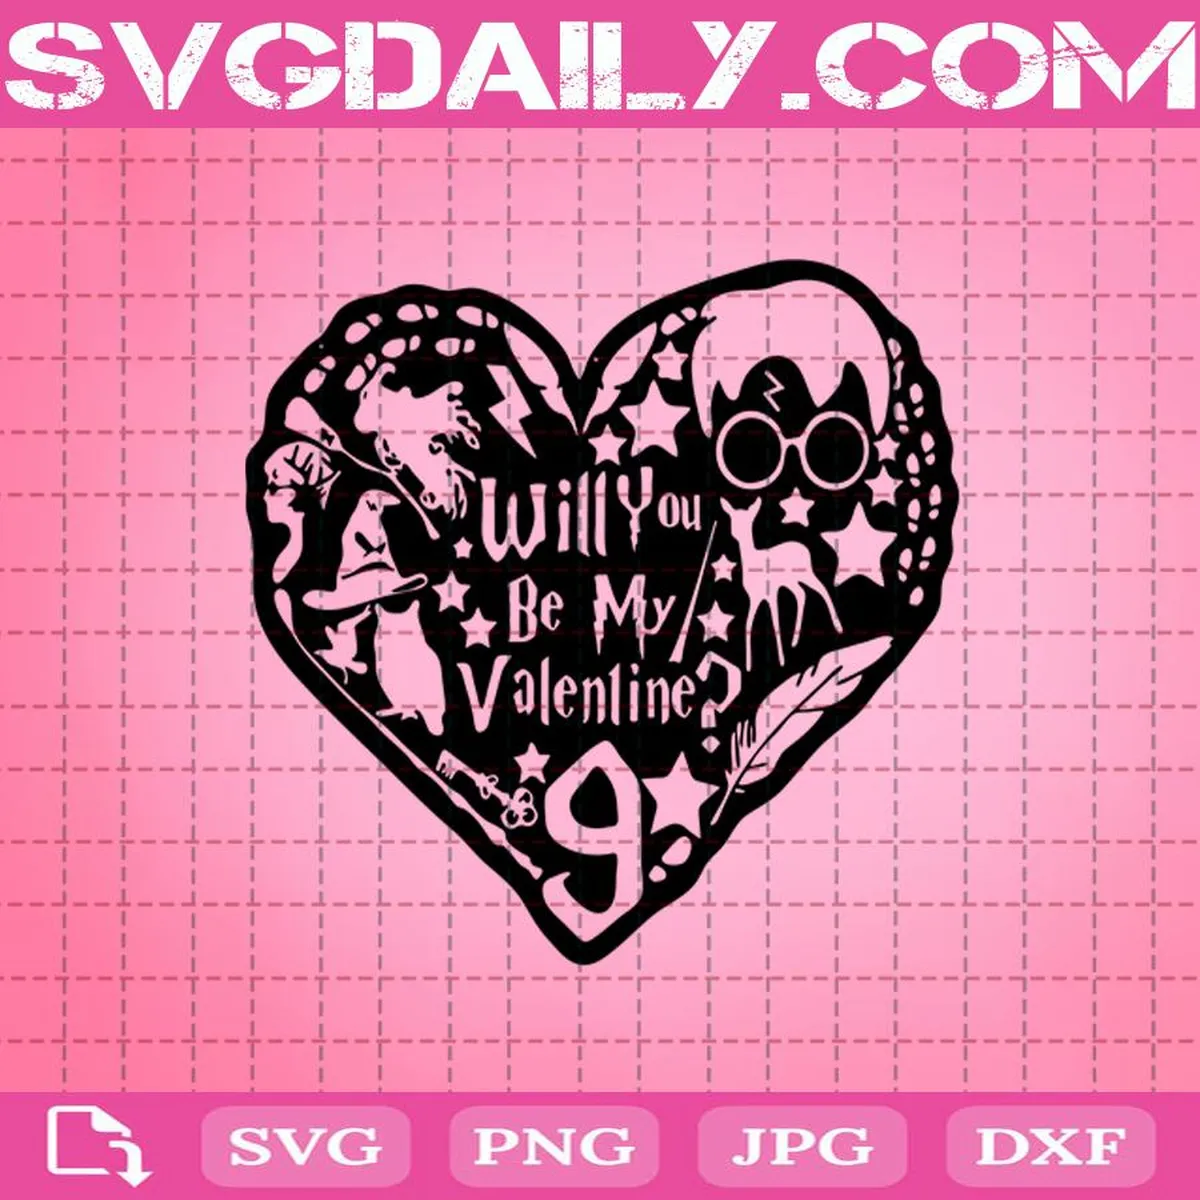 Will You Be My Valentine Svg, Black Heart Svg, Witch Valentine ‘s Day Svg, Happy Valentine Svg, Svg Png Dxf Eps AI Instant Download